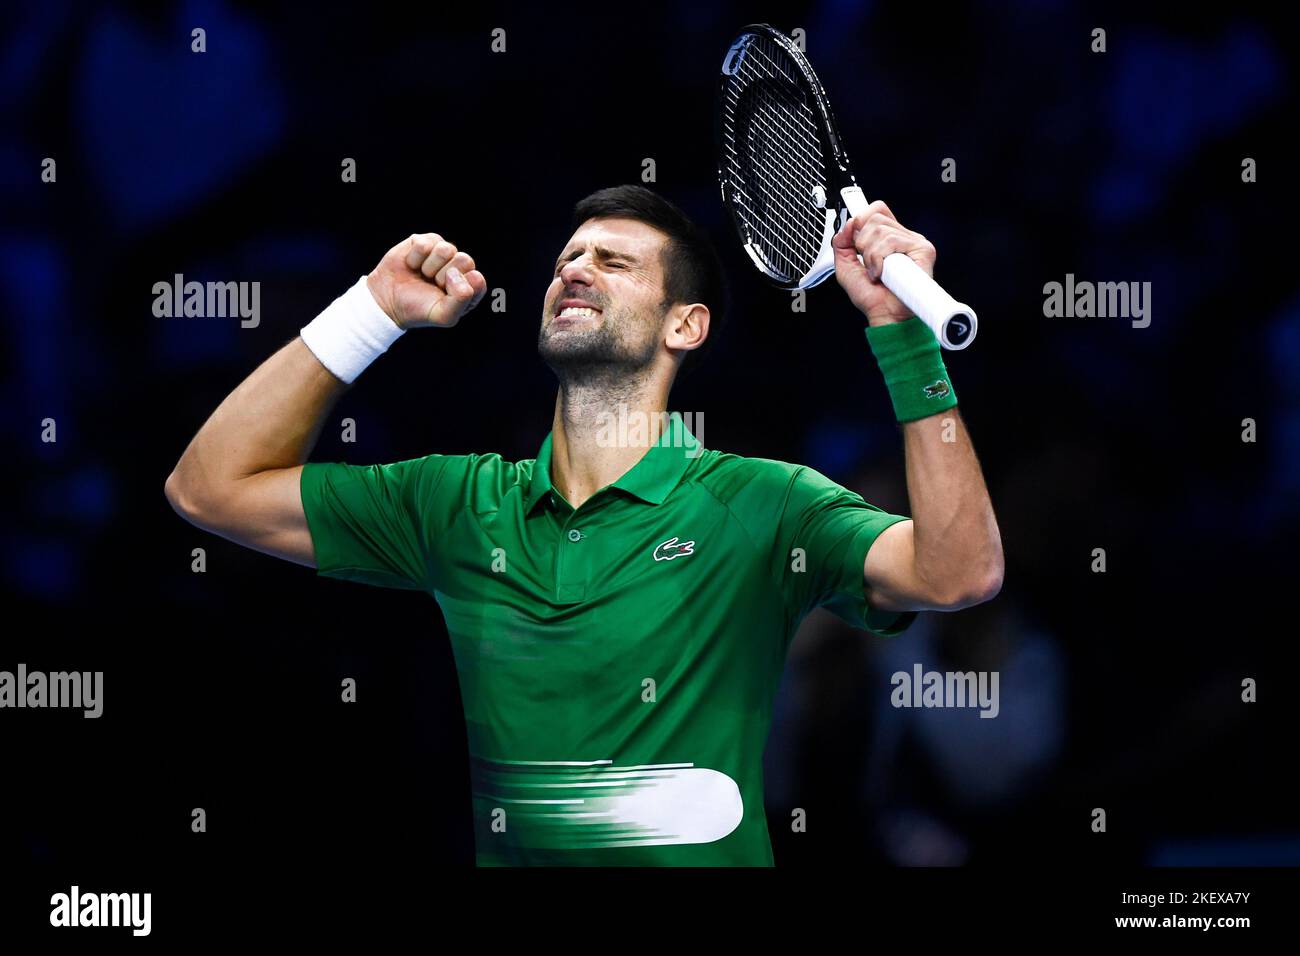 Turin, Italy. 14 November 2022. Novak Djokovic of Serbia celebrates the victory at the end of his round robin match against Stefanos Tsitsipas of Greece during day two of the Nitto ATP Finals. Credit: Nicolò Campo/Alamy Live News Stock Photo